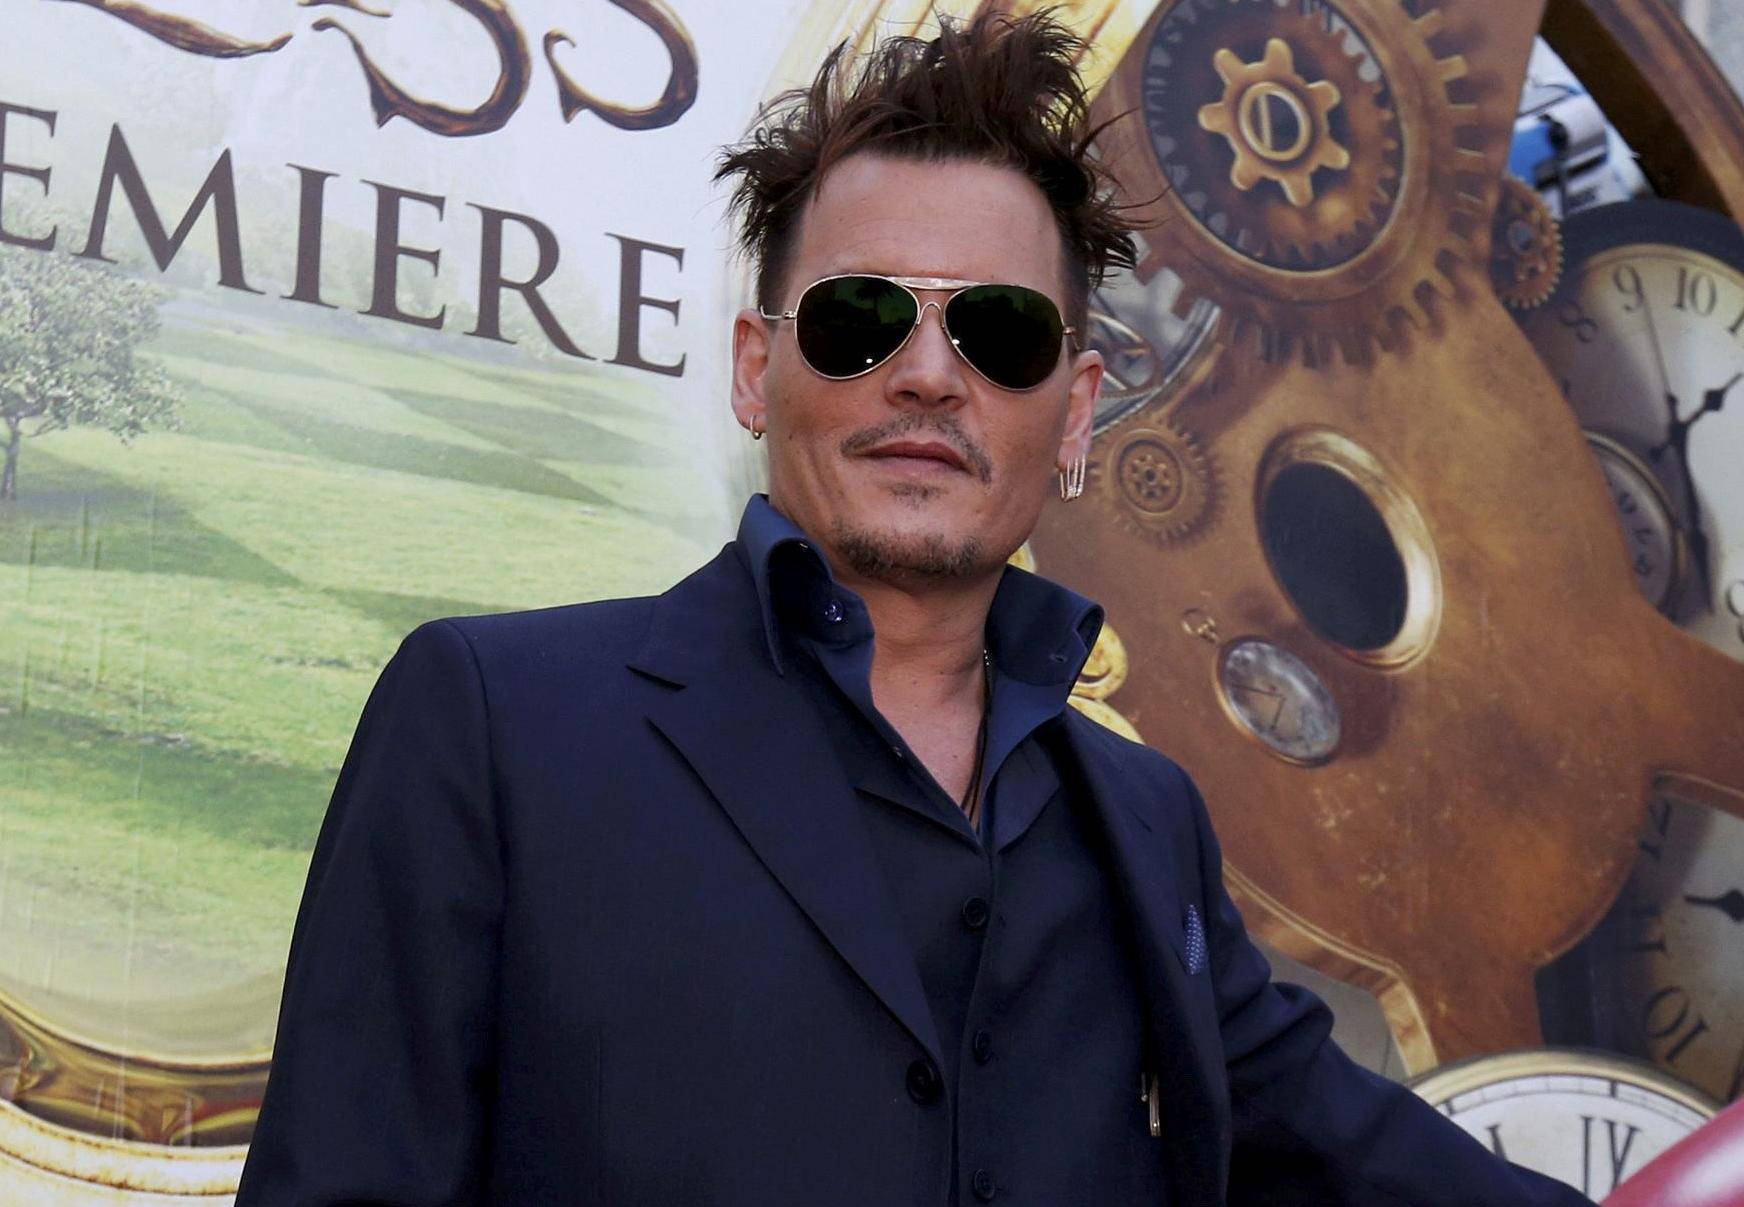 FILE PHOTO -  Cast member Depp poses at the premiere of "Alice Through the Looking Glass" at El Capitan theatre in Hollywood